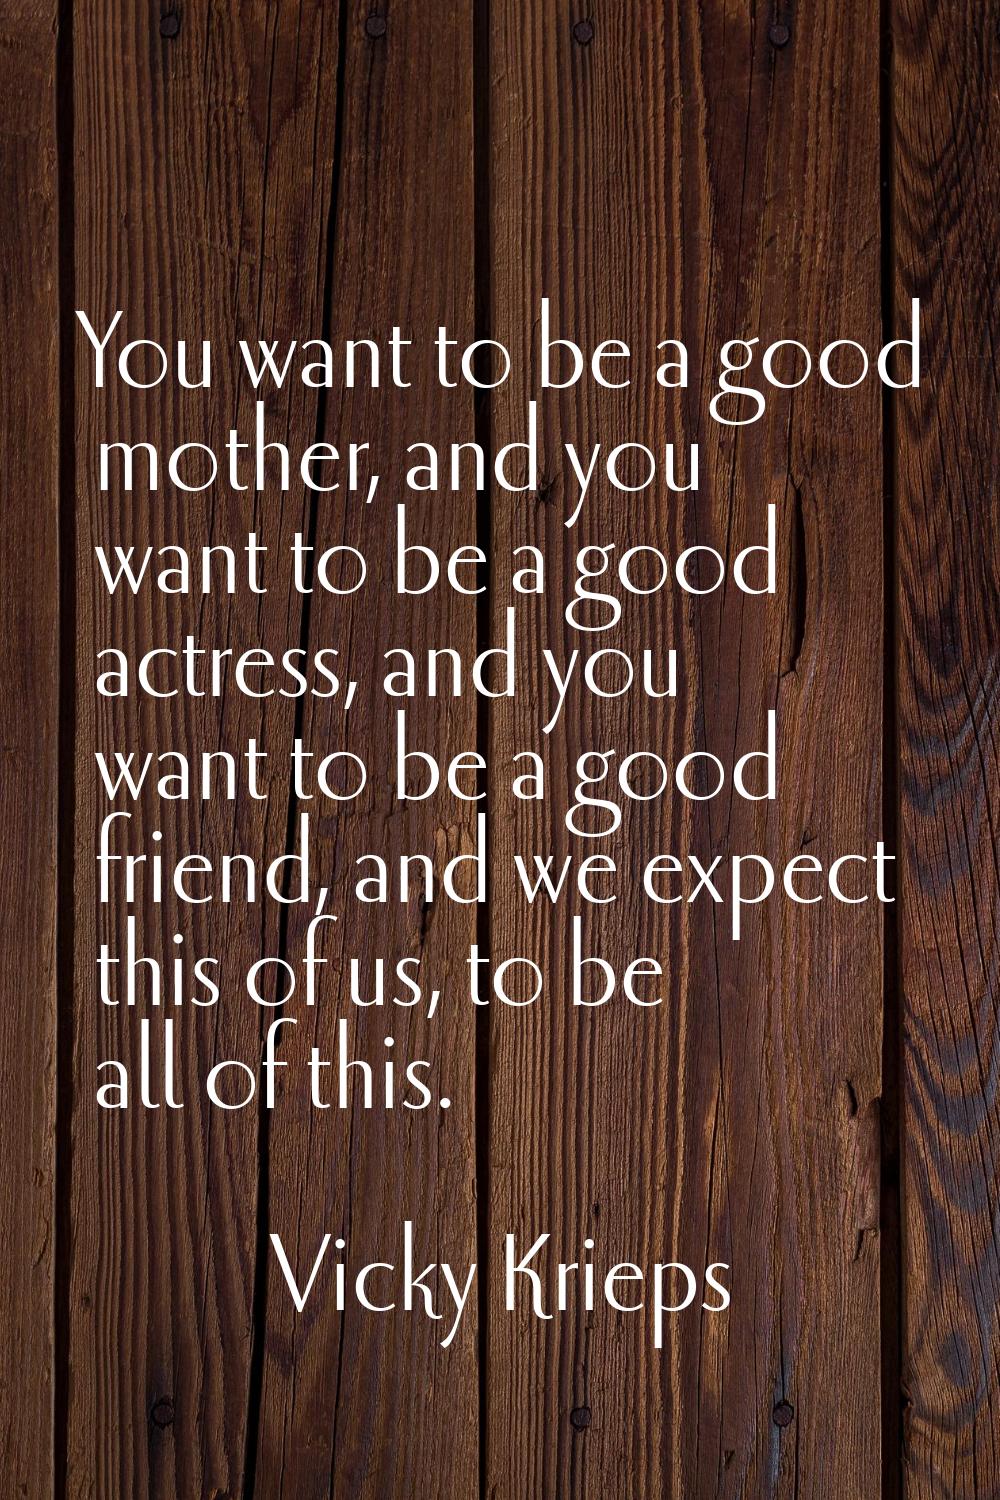 You want to be a good mother, and you want to be a good actress, and you want to be a good friend, 